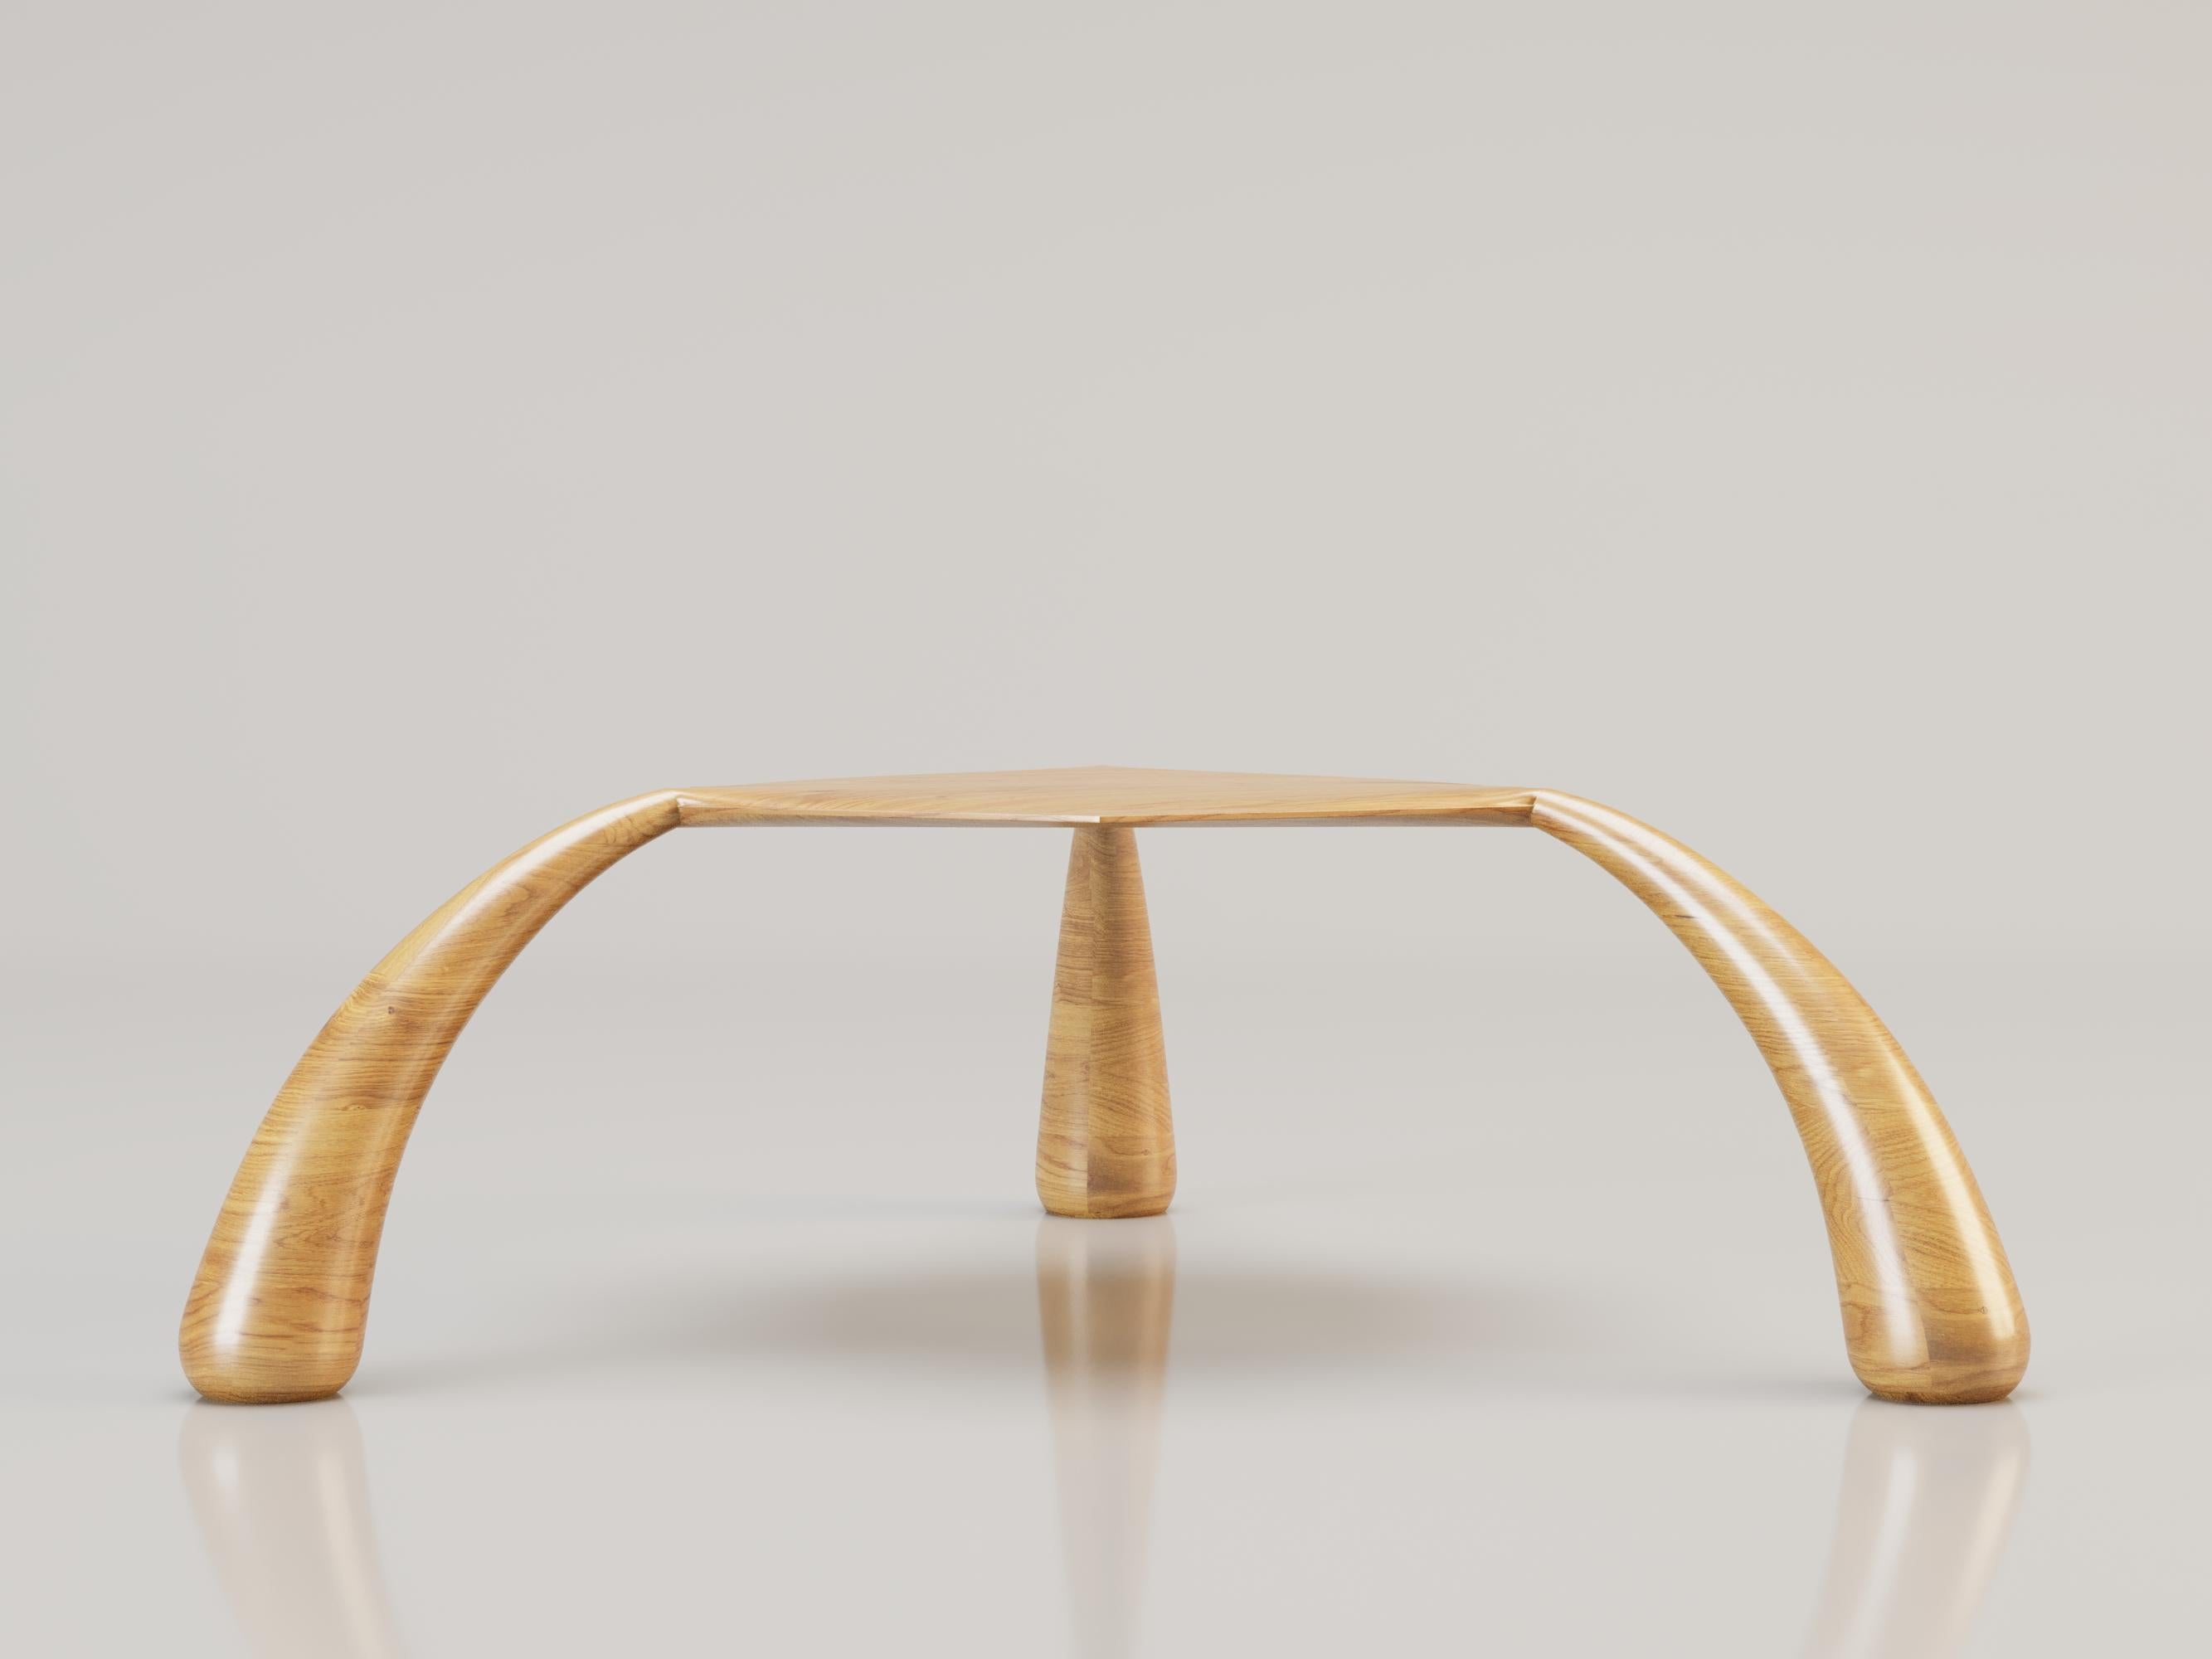 LA DISTINCTE Side Table by Alexandre Ligios

Oak Wood

L 20 x H 14 x D 20

The oak coffee or side table presents a distinctive design with an octagonal tabletop and elegantly crafted legs shaped like droplets. The natural beauty of oak is showcased